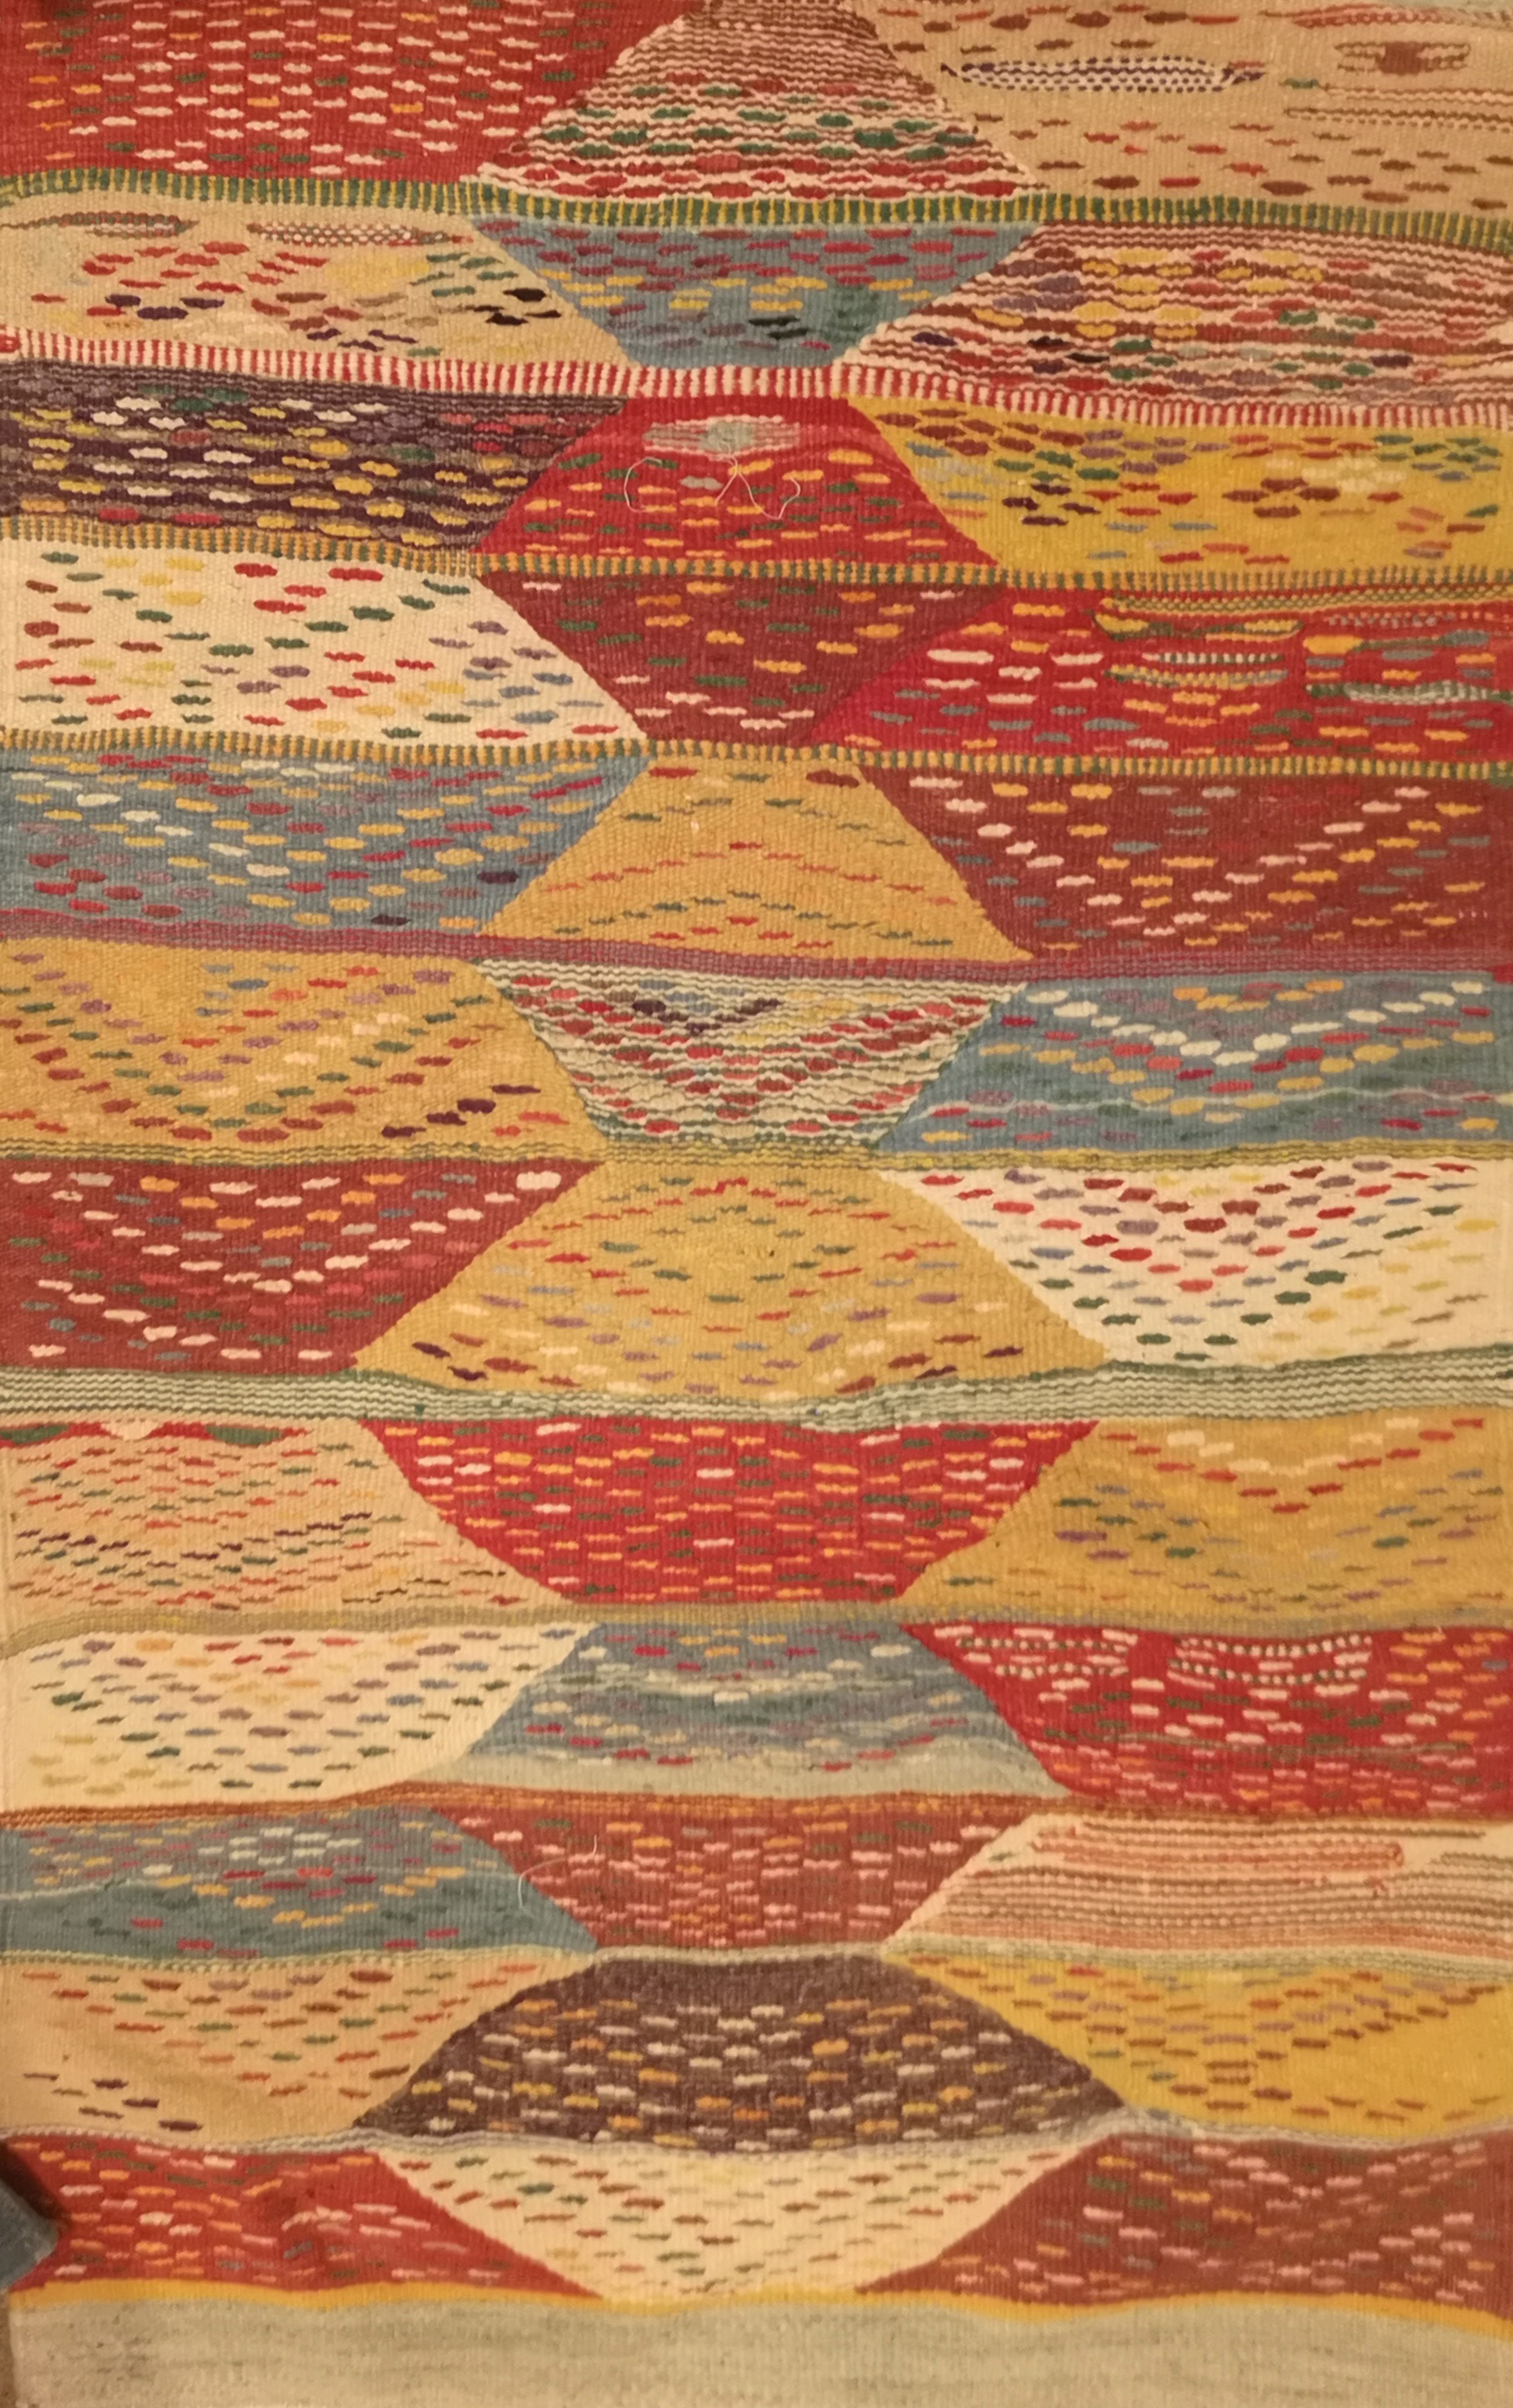 A COLLECTION OF SEVEN RECTANGULAR CONTINENTAL HAND WOVEN WOOLLEN RUGS Various design. (approx 62cm x - Image 7 of 7